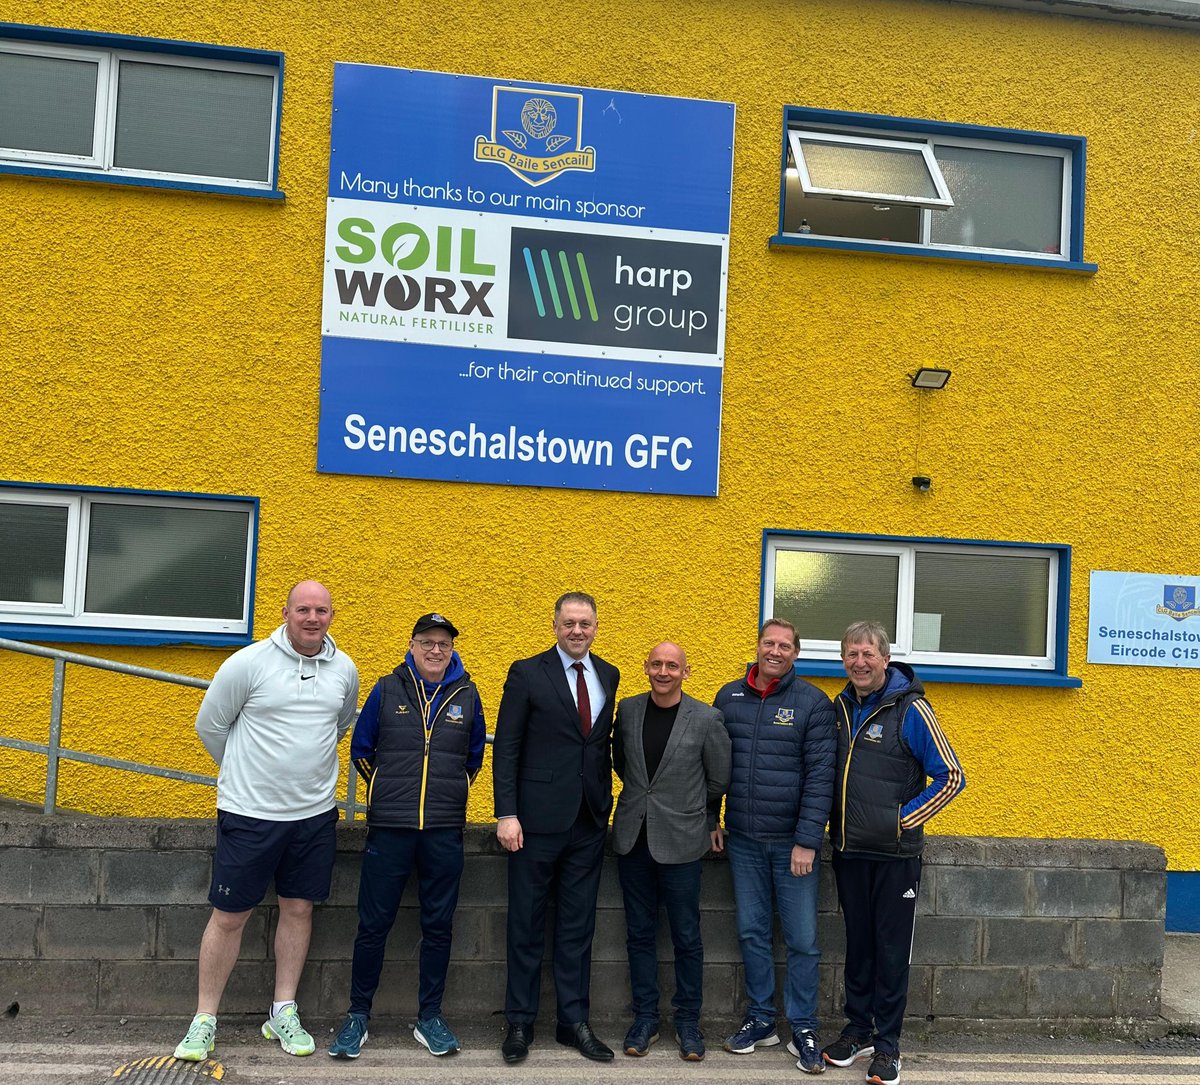 Great visit to @SeneschalstownG last week with Councillor Wayne Harding. Club officers Kieran Mulvany and Leo Sheridan showed us around and we met old friends and legends @Squarecut84 and Graham Geraghty. A club my family is happy to be associated with, as Ann Byrne won two…